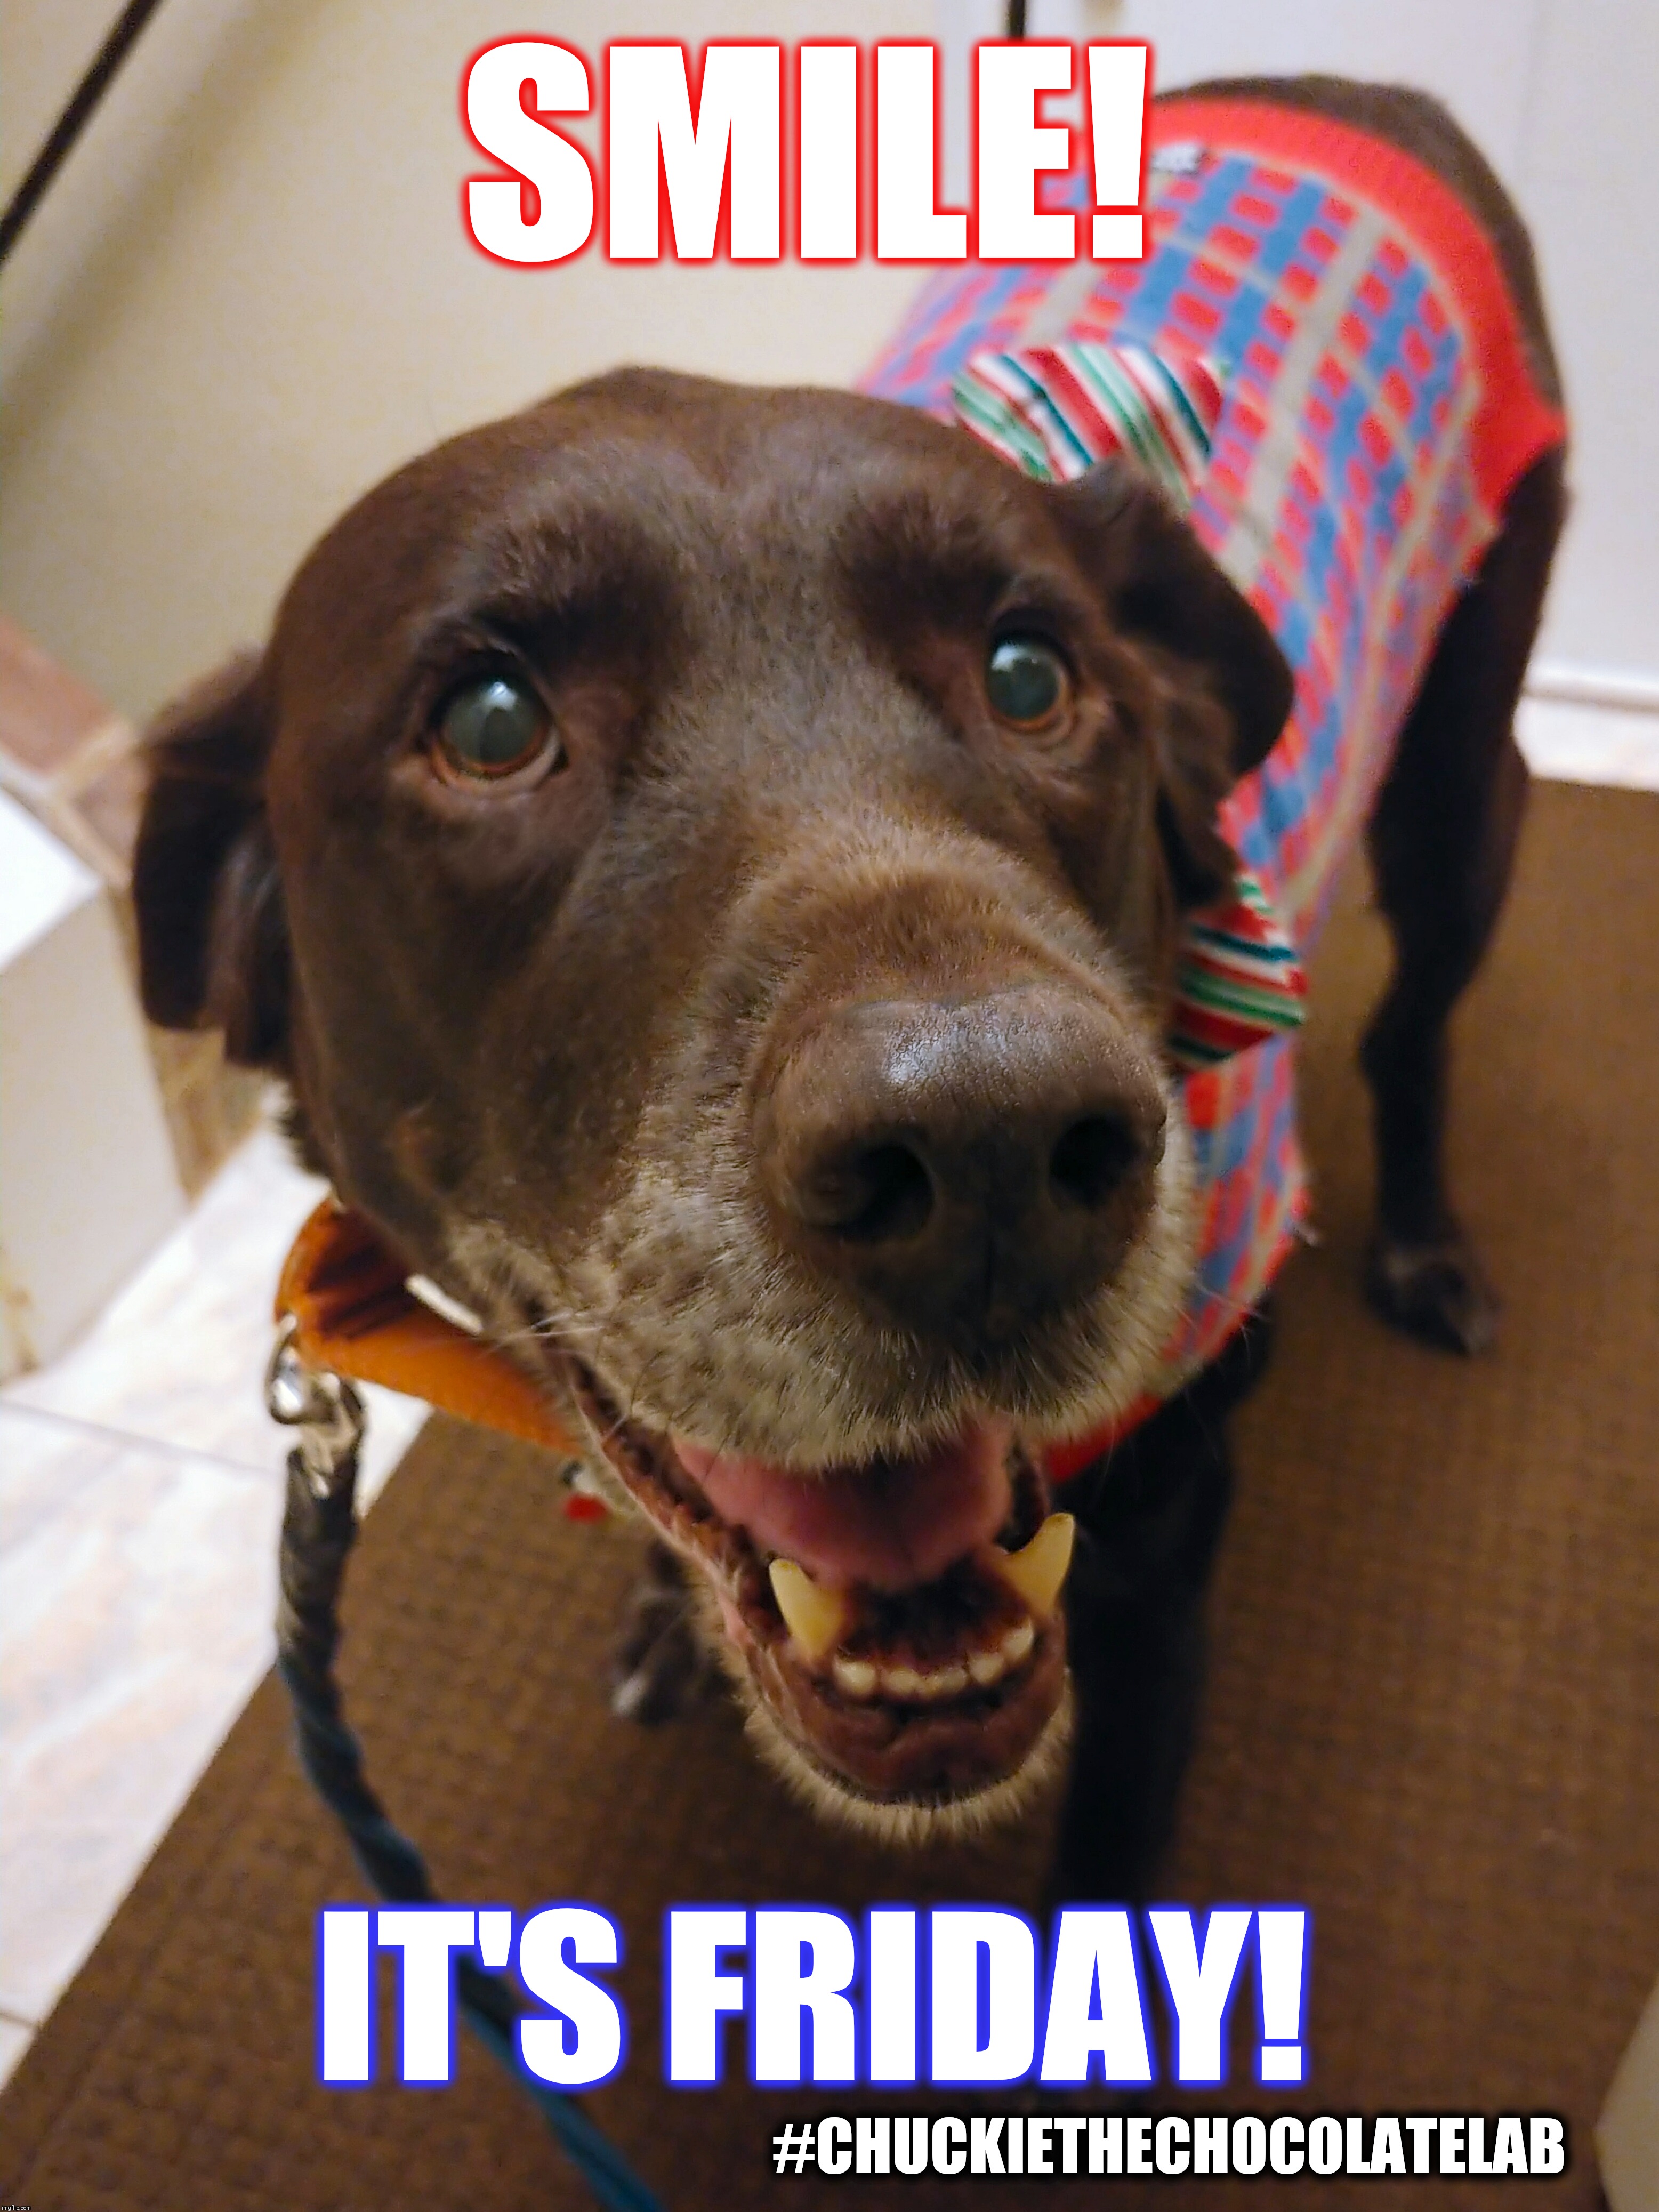 Smile, it's Friday | SMILE! IT'S FRIDAY! #CHUCKIETHECHOCOLATELAB | image tagged in chuckie the chocolate lab,dogs,memes,cute animals,smile,friday | made w/ Imgflip meme maker